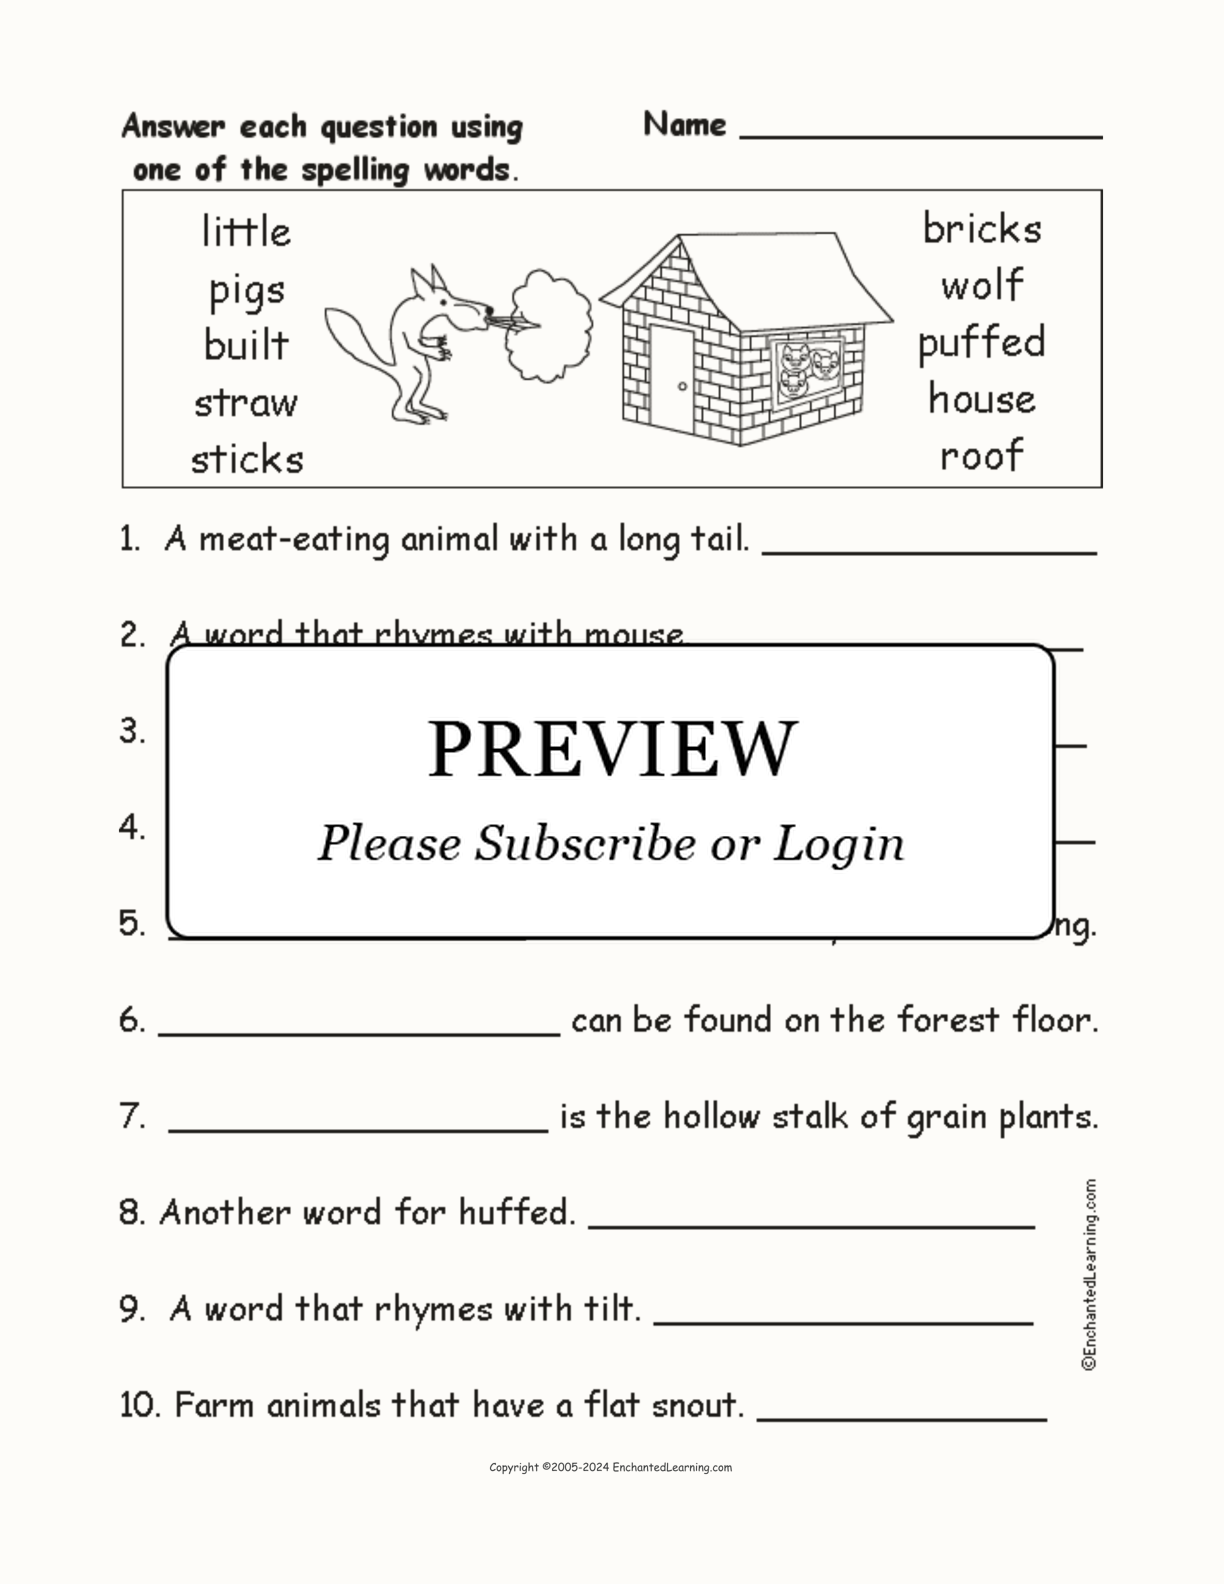 'Three Little Pigs' Spelling Word Questions interactive worksheet page 1